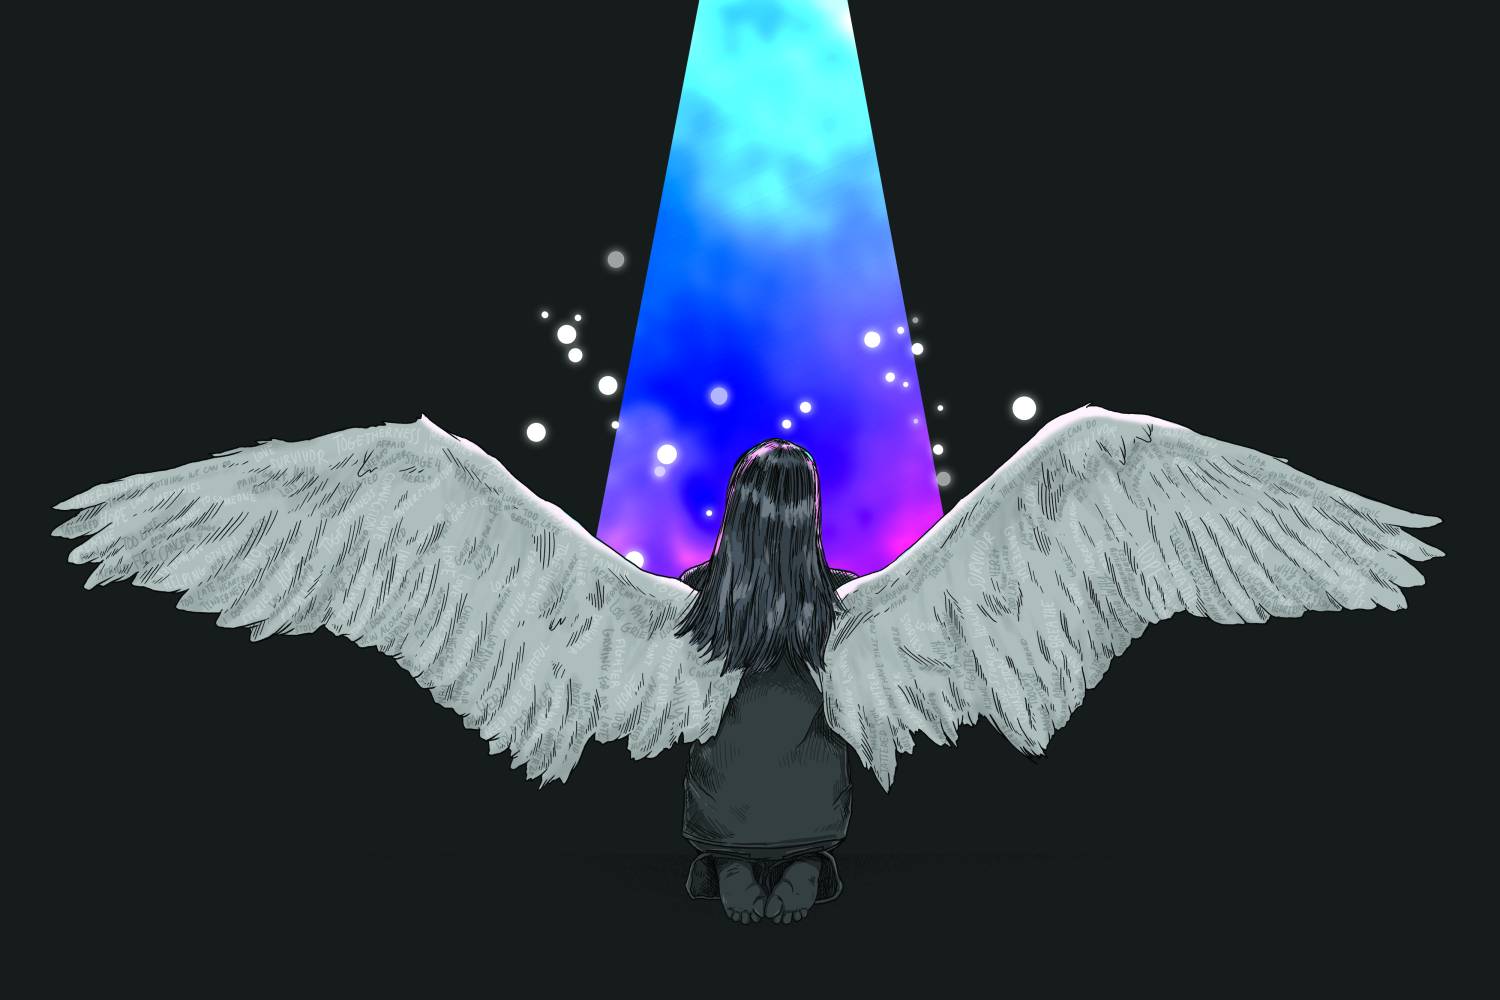 Illustration of a person with long hair facing away from us, kneeling, barefoot. They have white wings outstretched. There is a ray of multicolored light coming down from the top of the frame. Floating light circles of various sizes surround the beam of light.